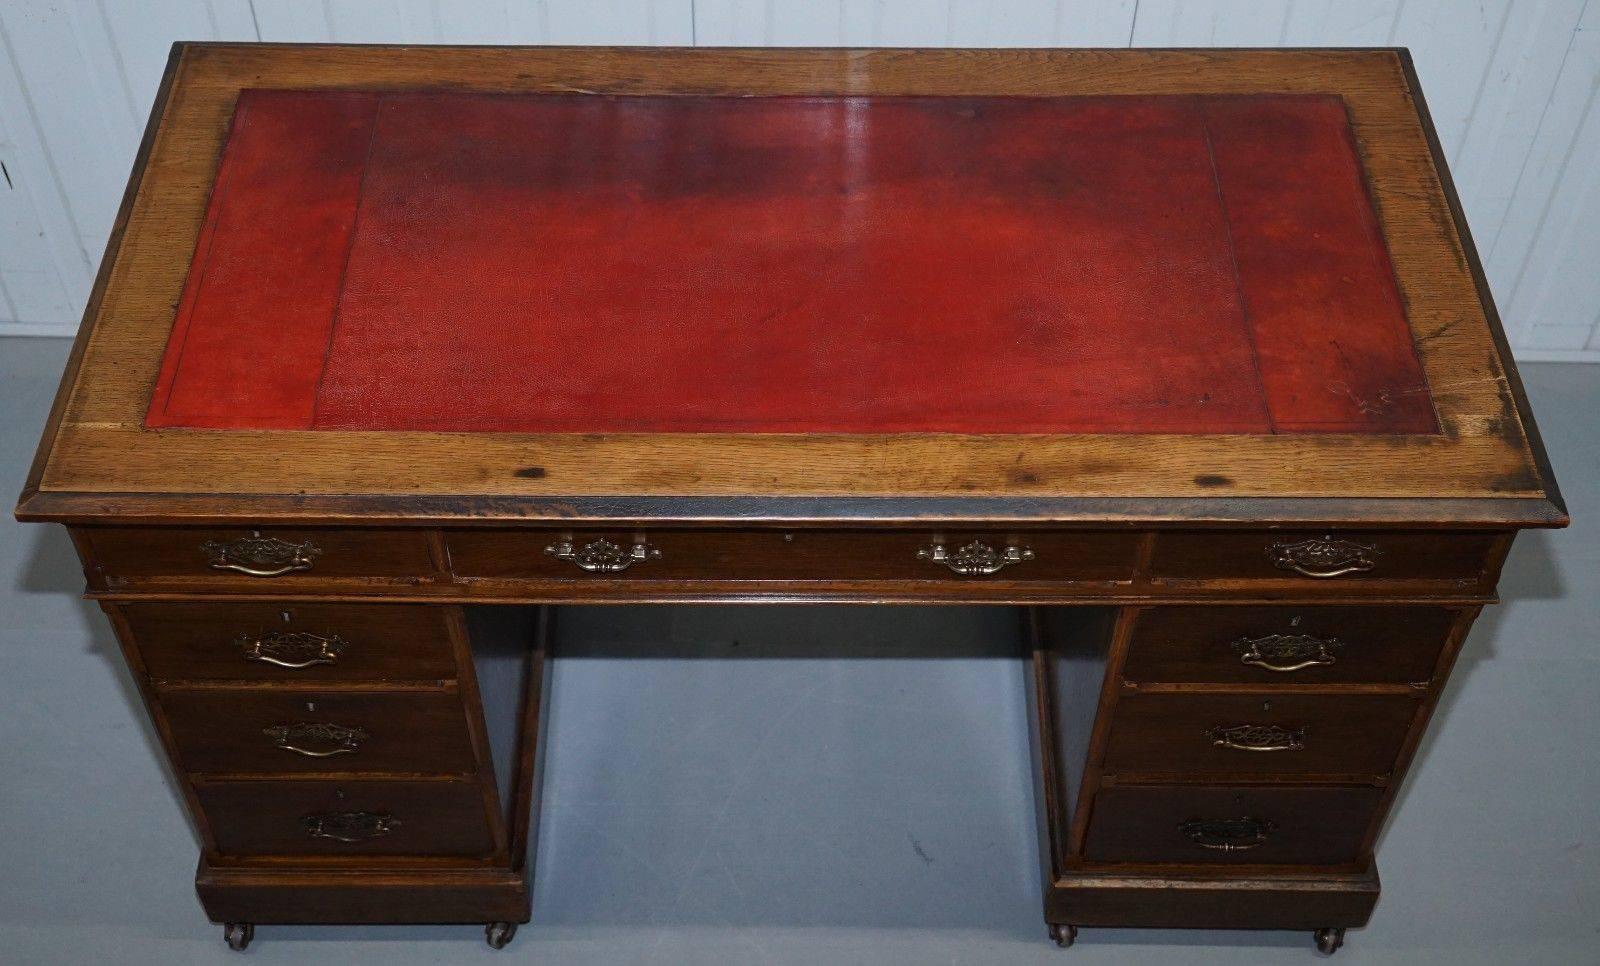 We are delighted to offer for sale this lovely period Victorian light mahogany twin pedestal partner desk

A good looking well made and functional piece that divides into three easy to transport pieces. The timber has been deep cleaned hand